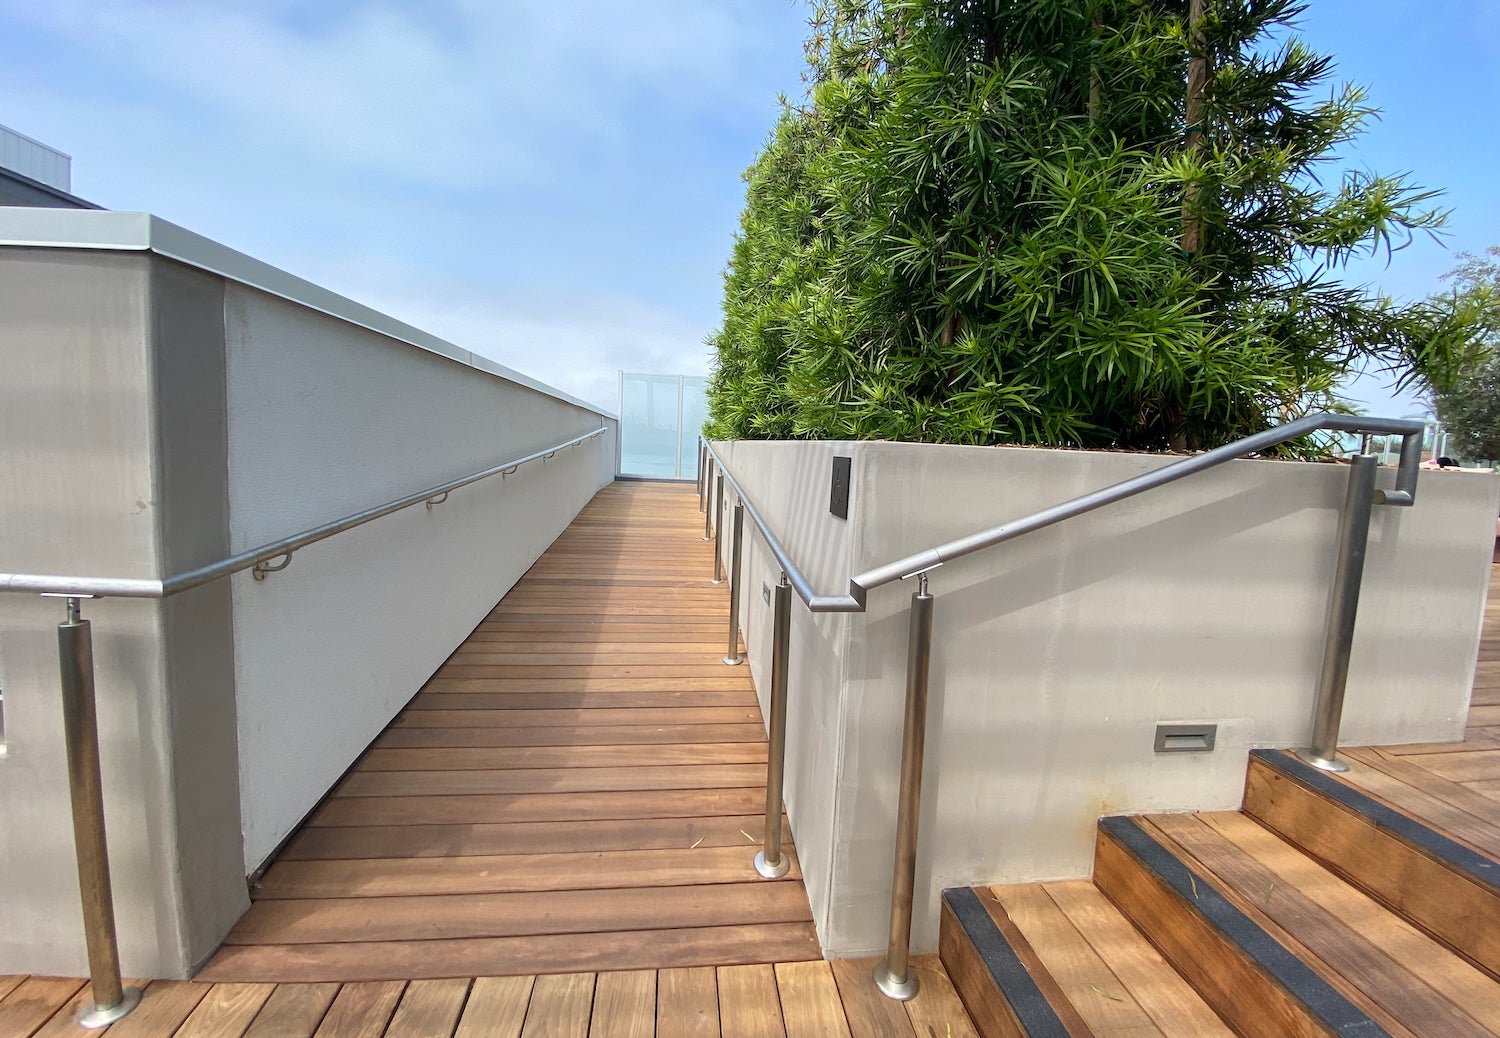 Wheelchair ramp leading up to The Rooftop Bar at Mission Pacific